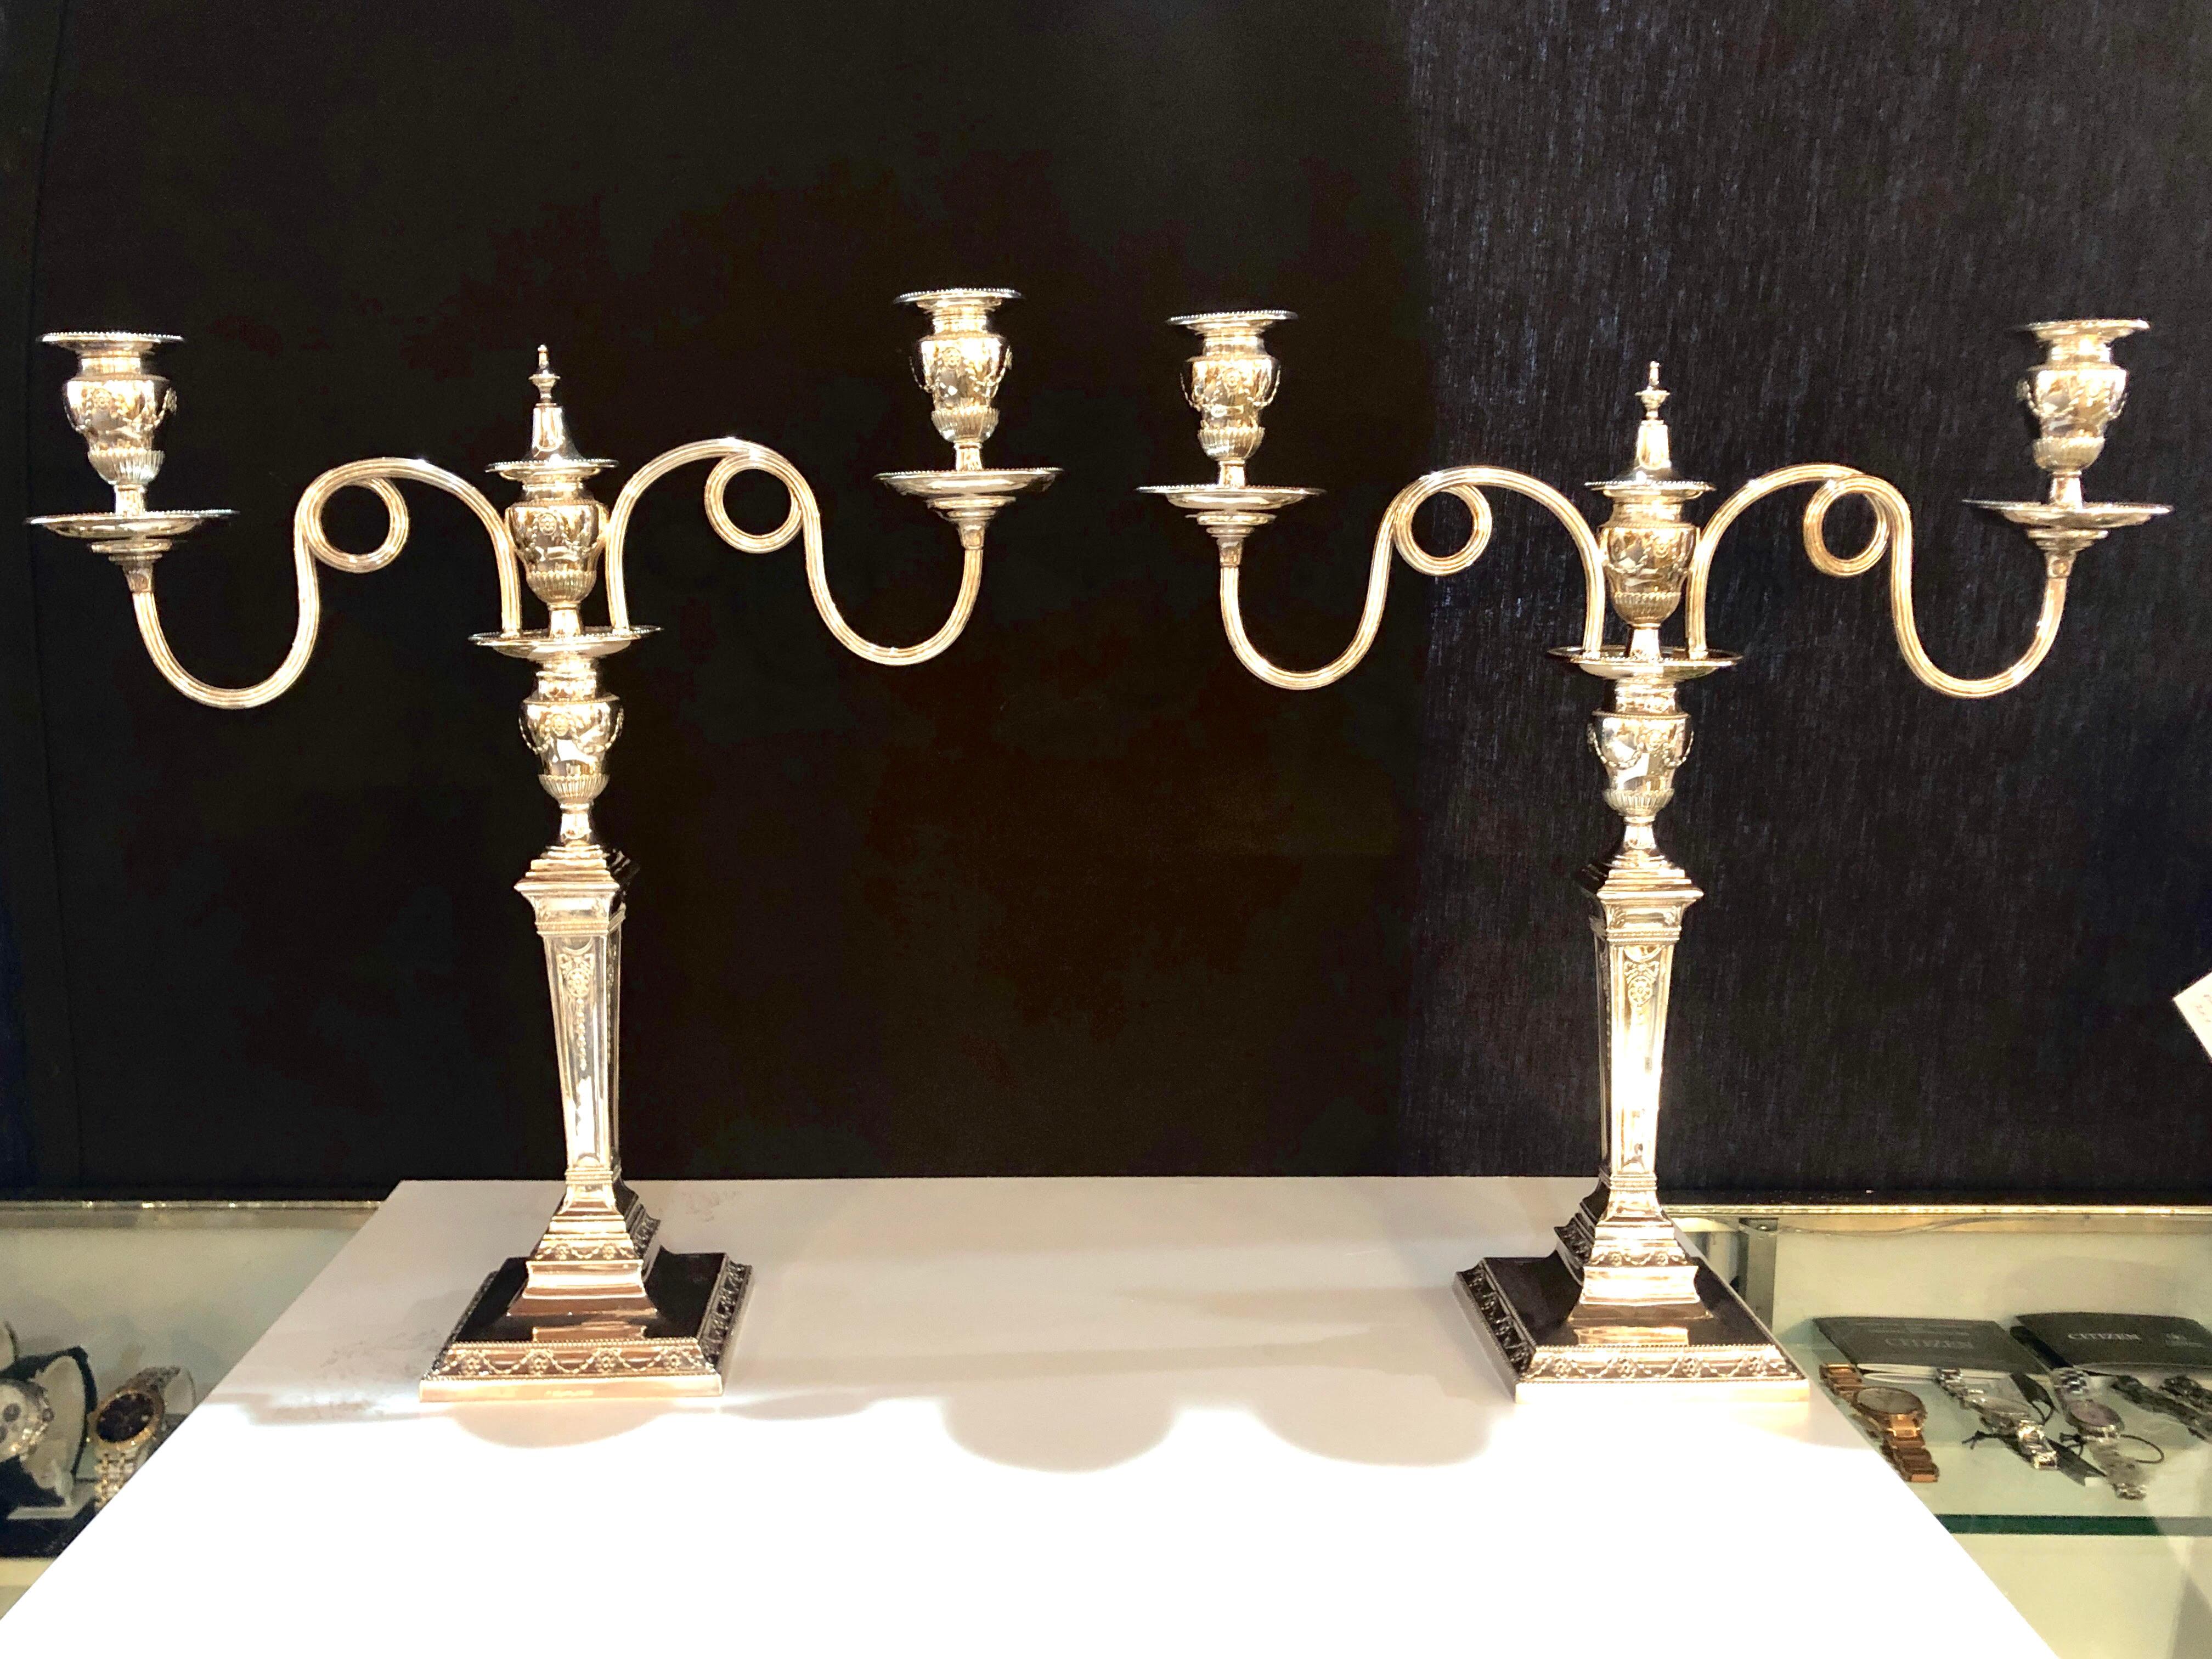 A fine early pair of silver plated Sheffield three-arm hallmarked candelabra each having a detachable group of branches. These finely chased pair of candelabra are simply stunning and ready to sit upon any table setting.